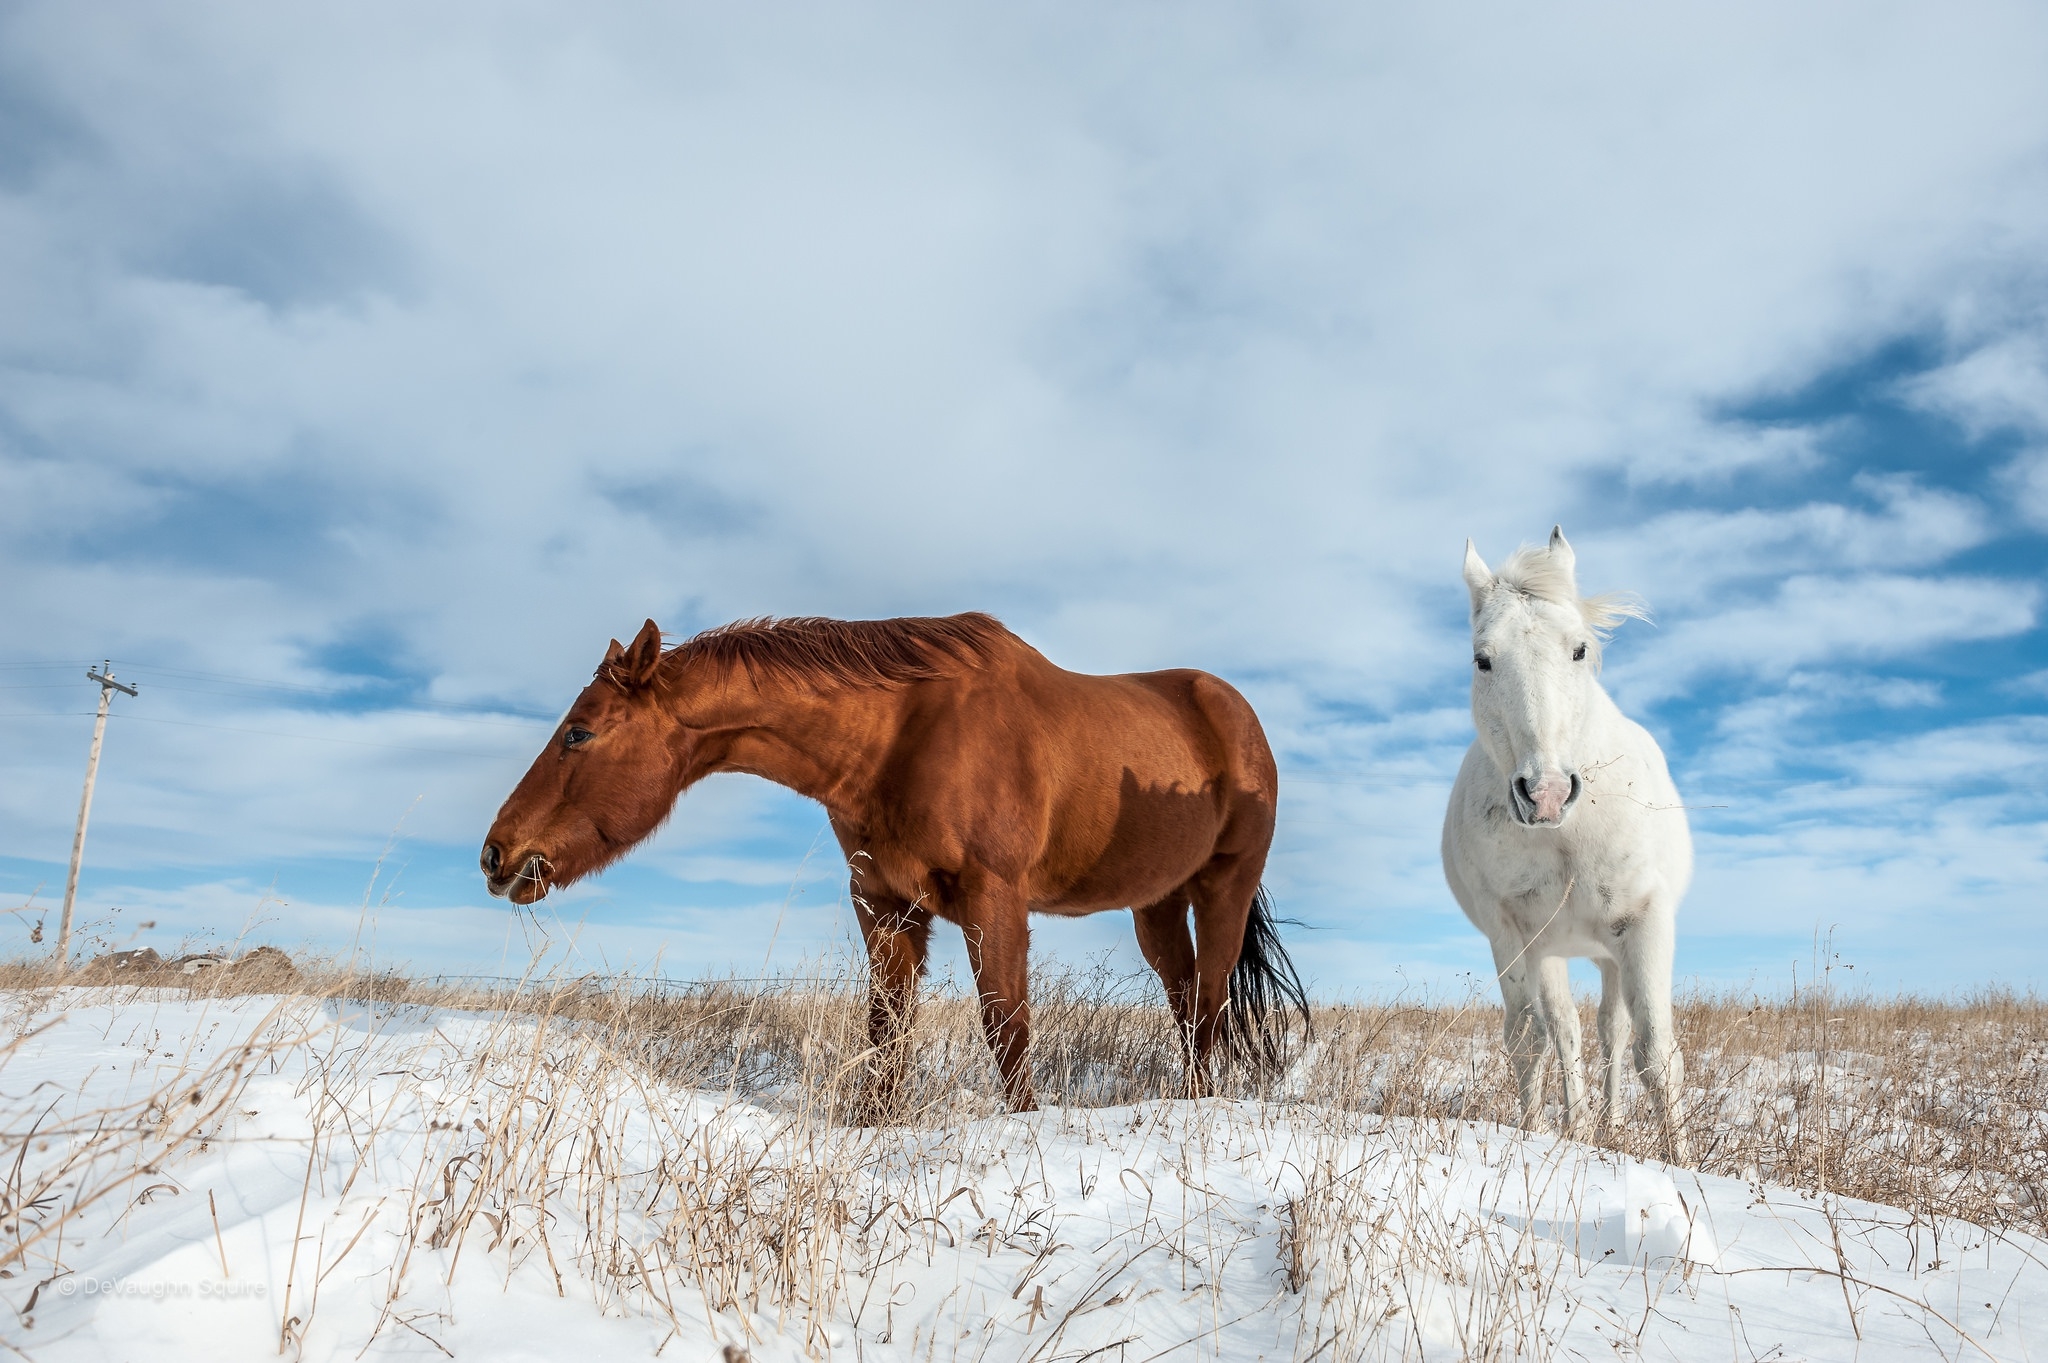 A white horse and a brown horse walk in a snowy field